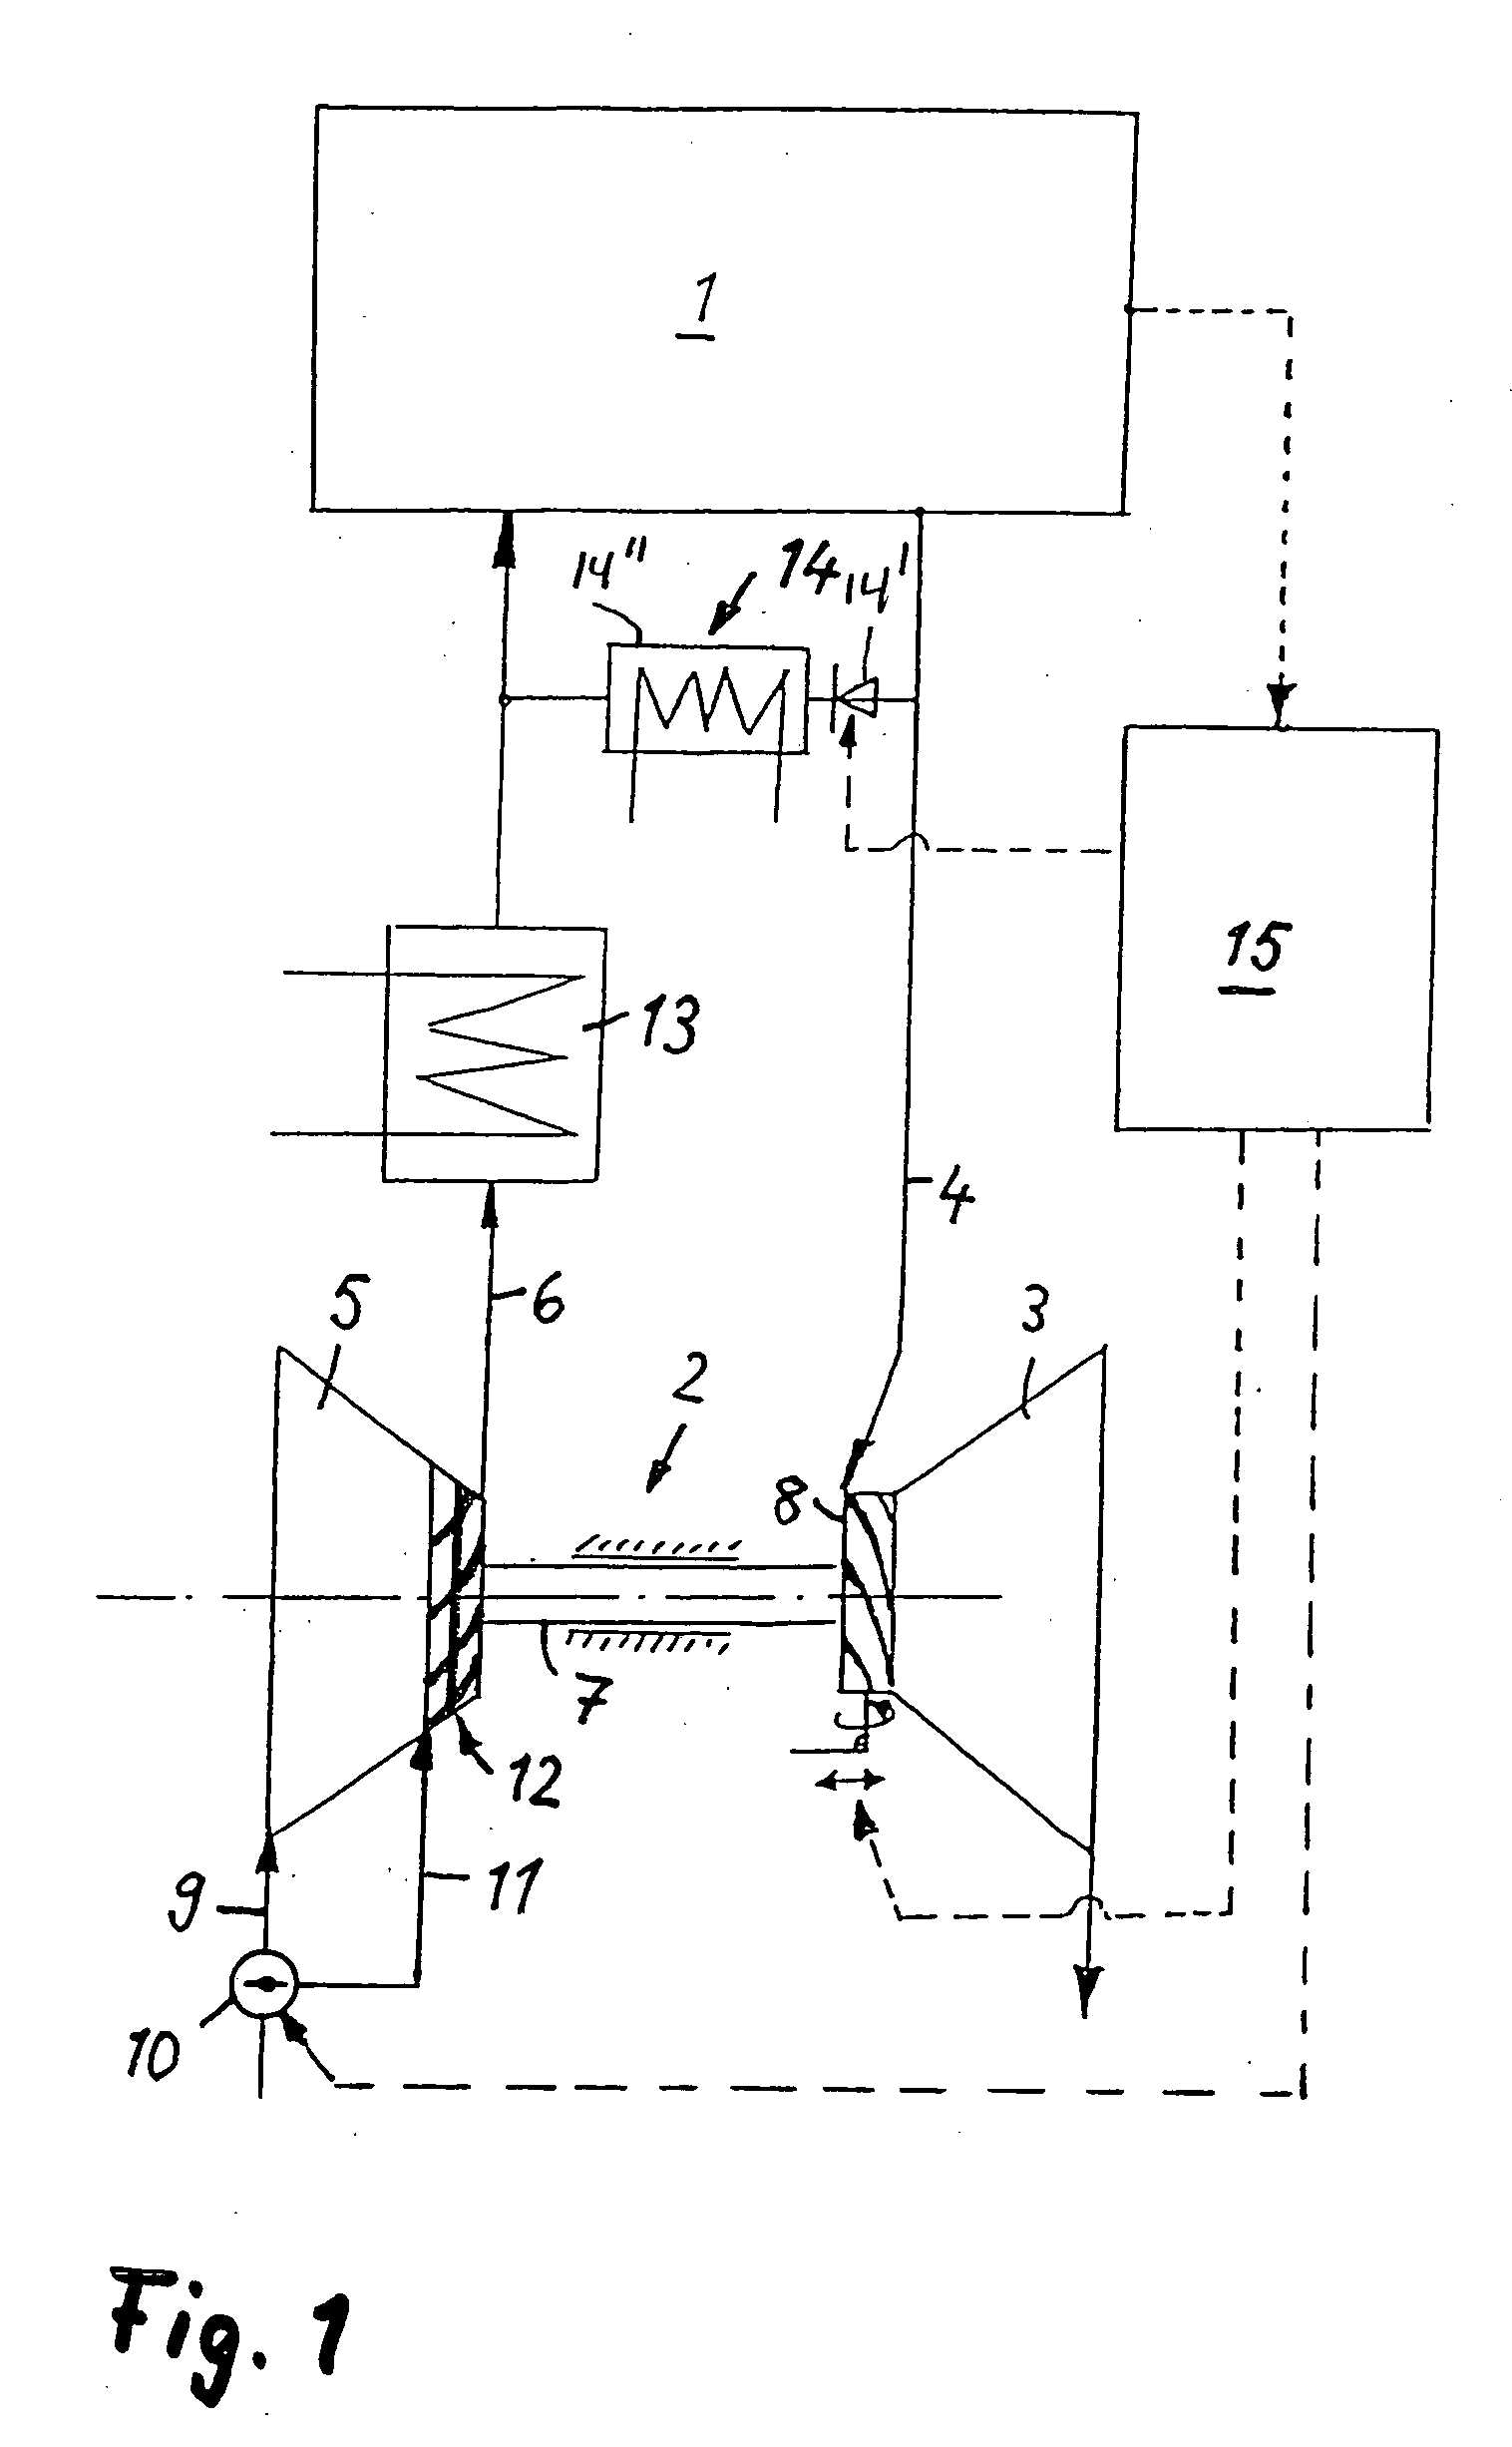 Compressor in the induction tract of an internal combustion engine